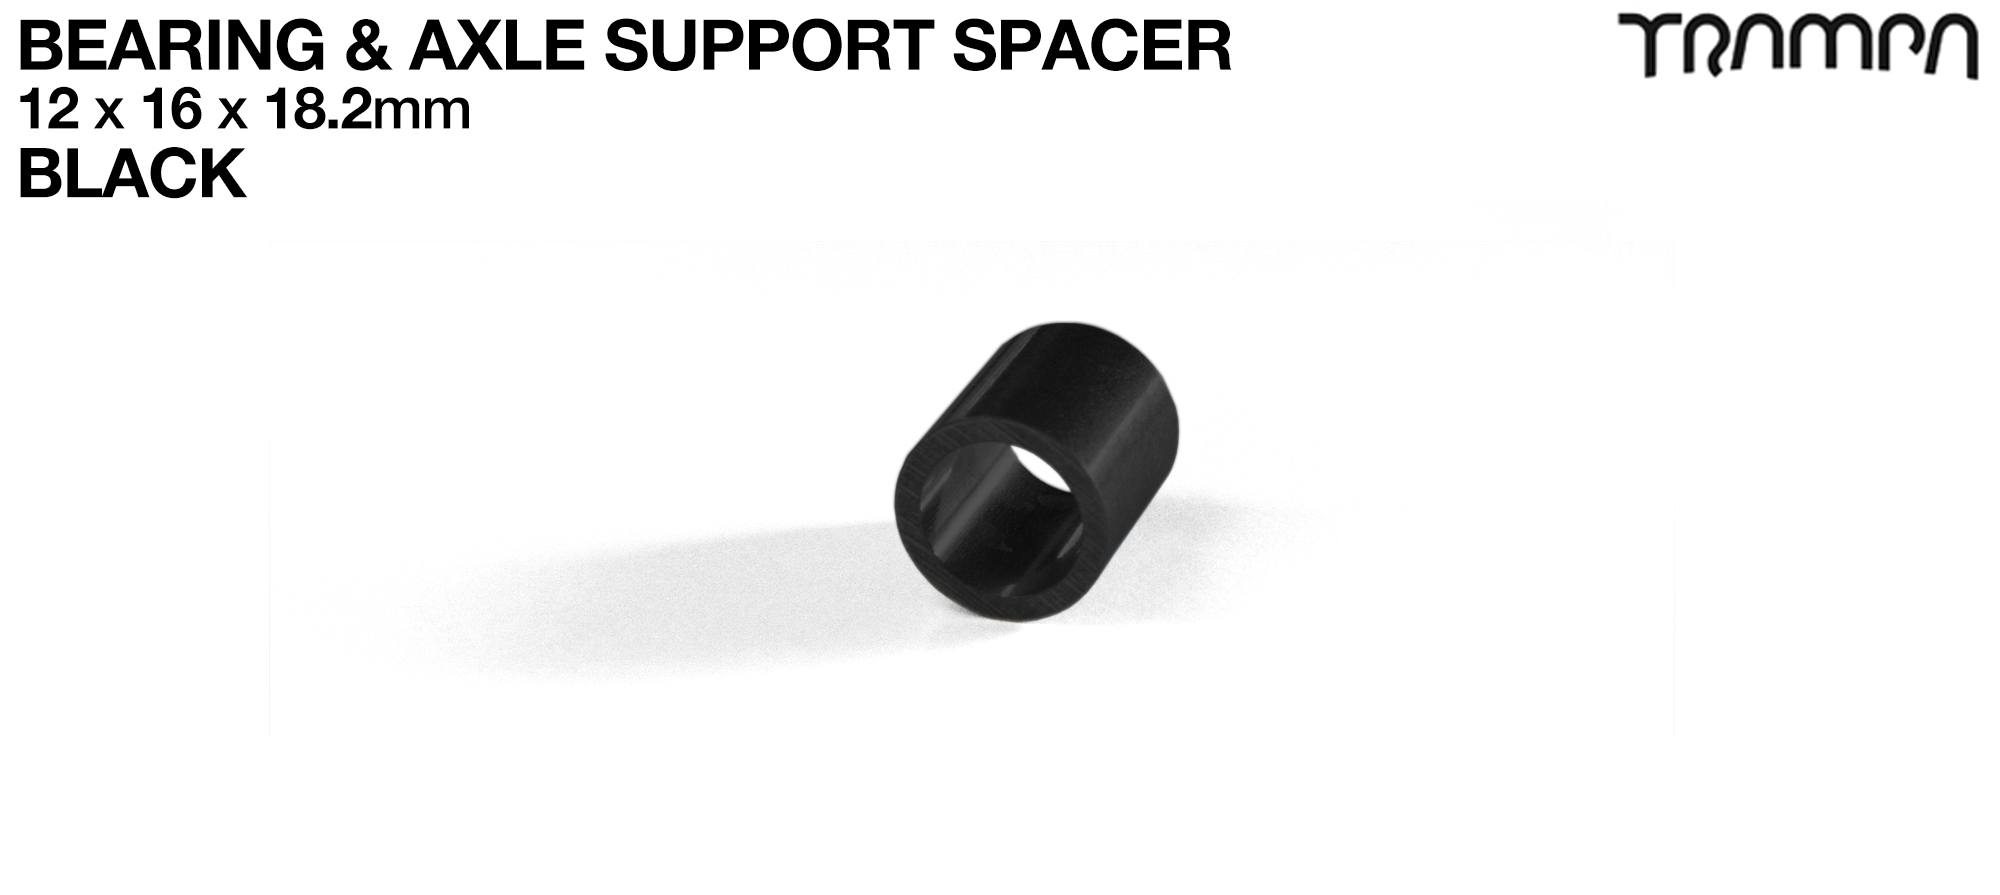 Wheel Support Axle Spacers - BLACK 